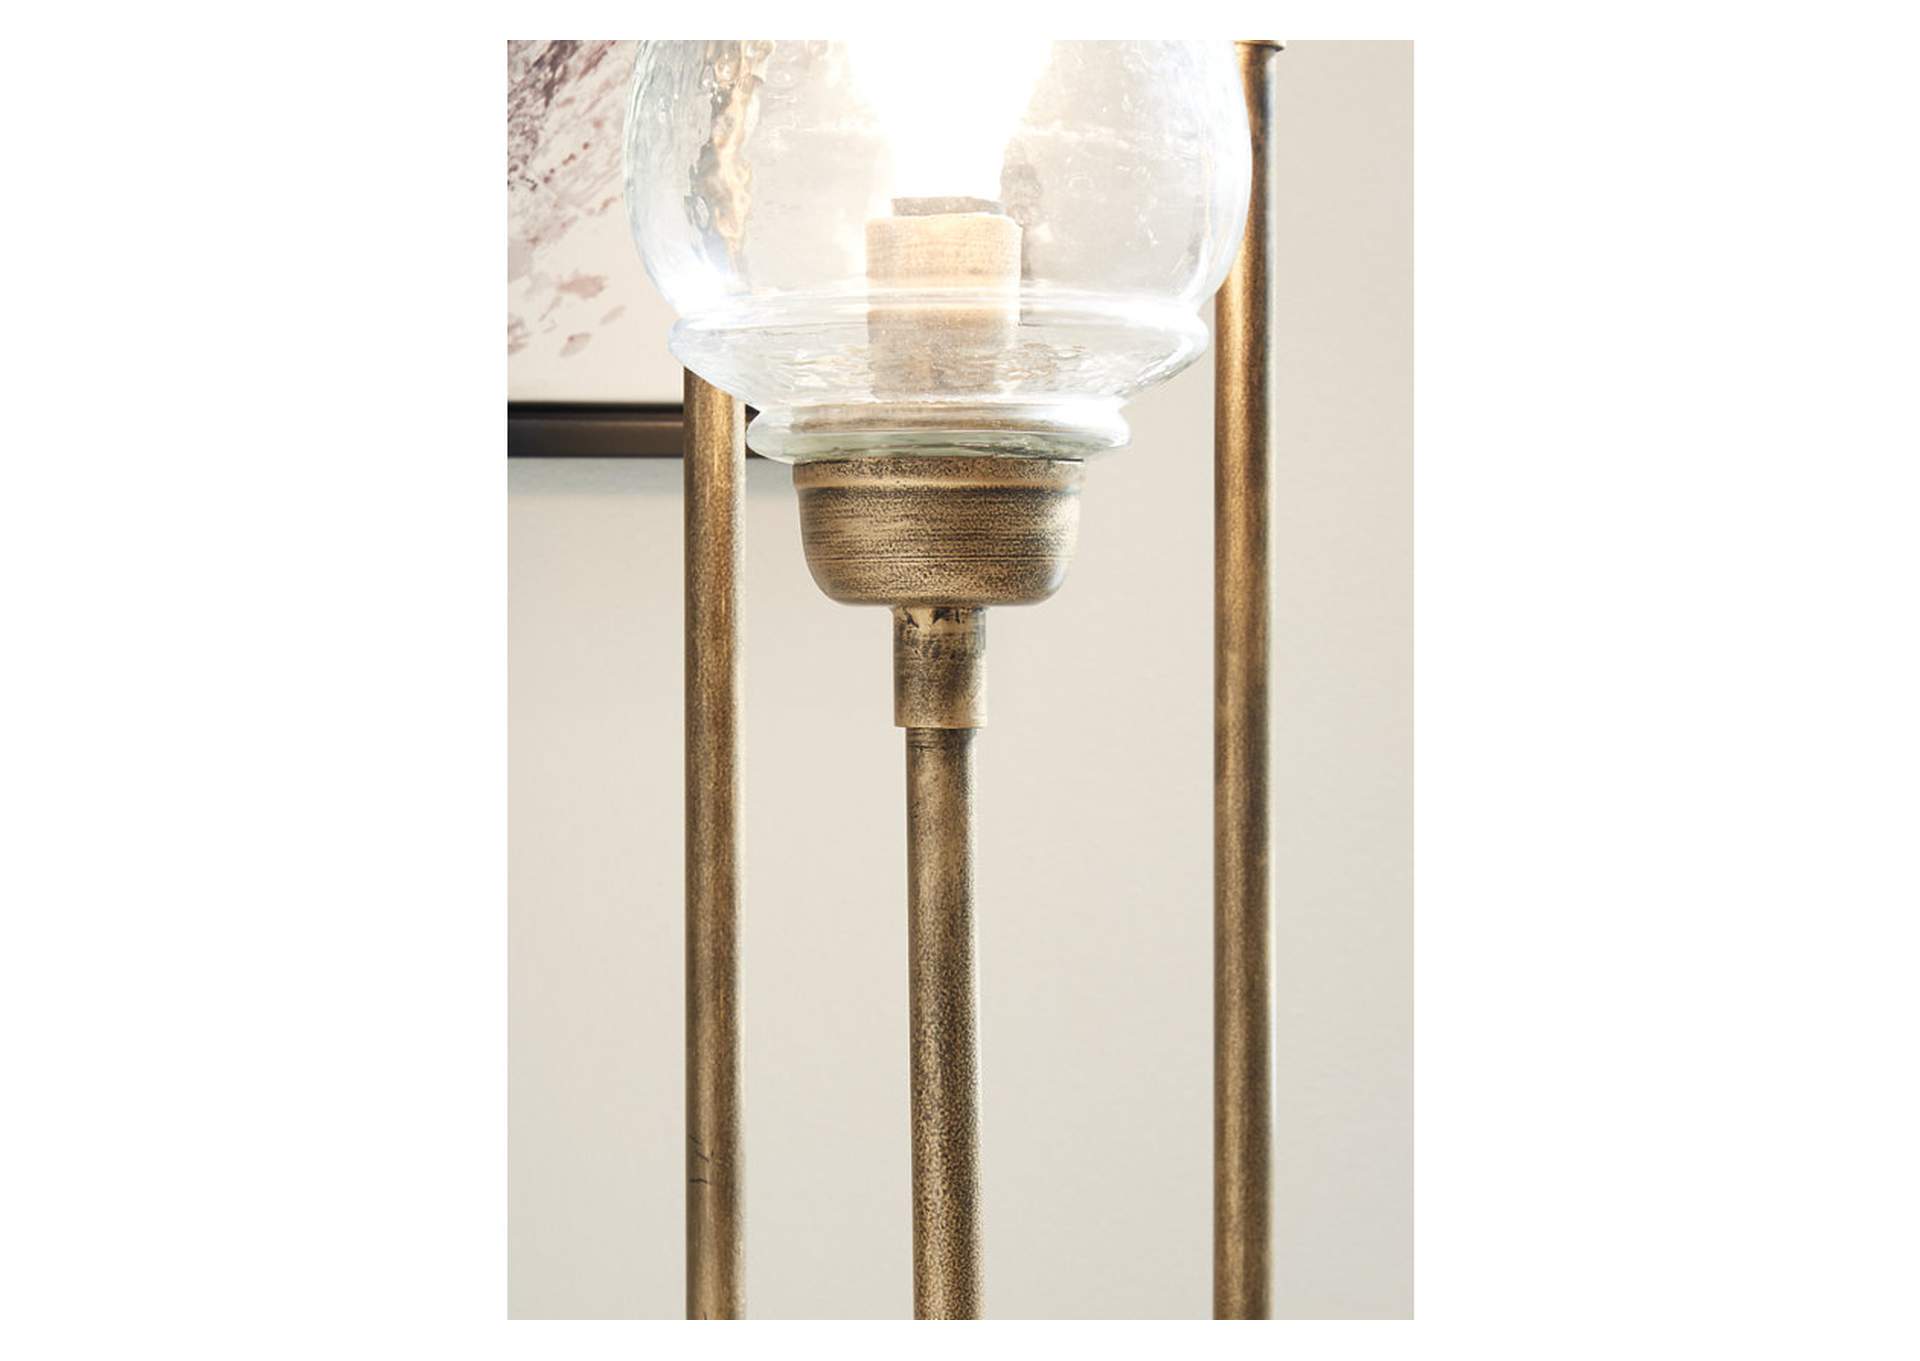 Emmie Floor Lamp,Signature Design By Ashley